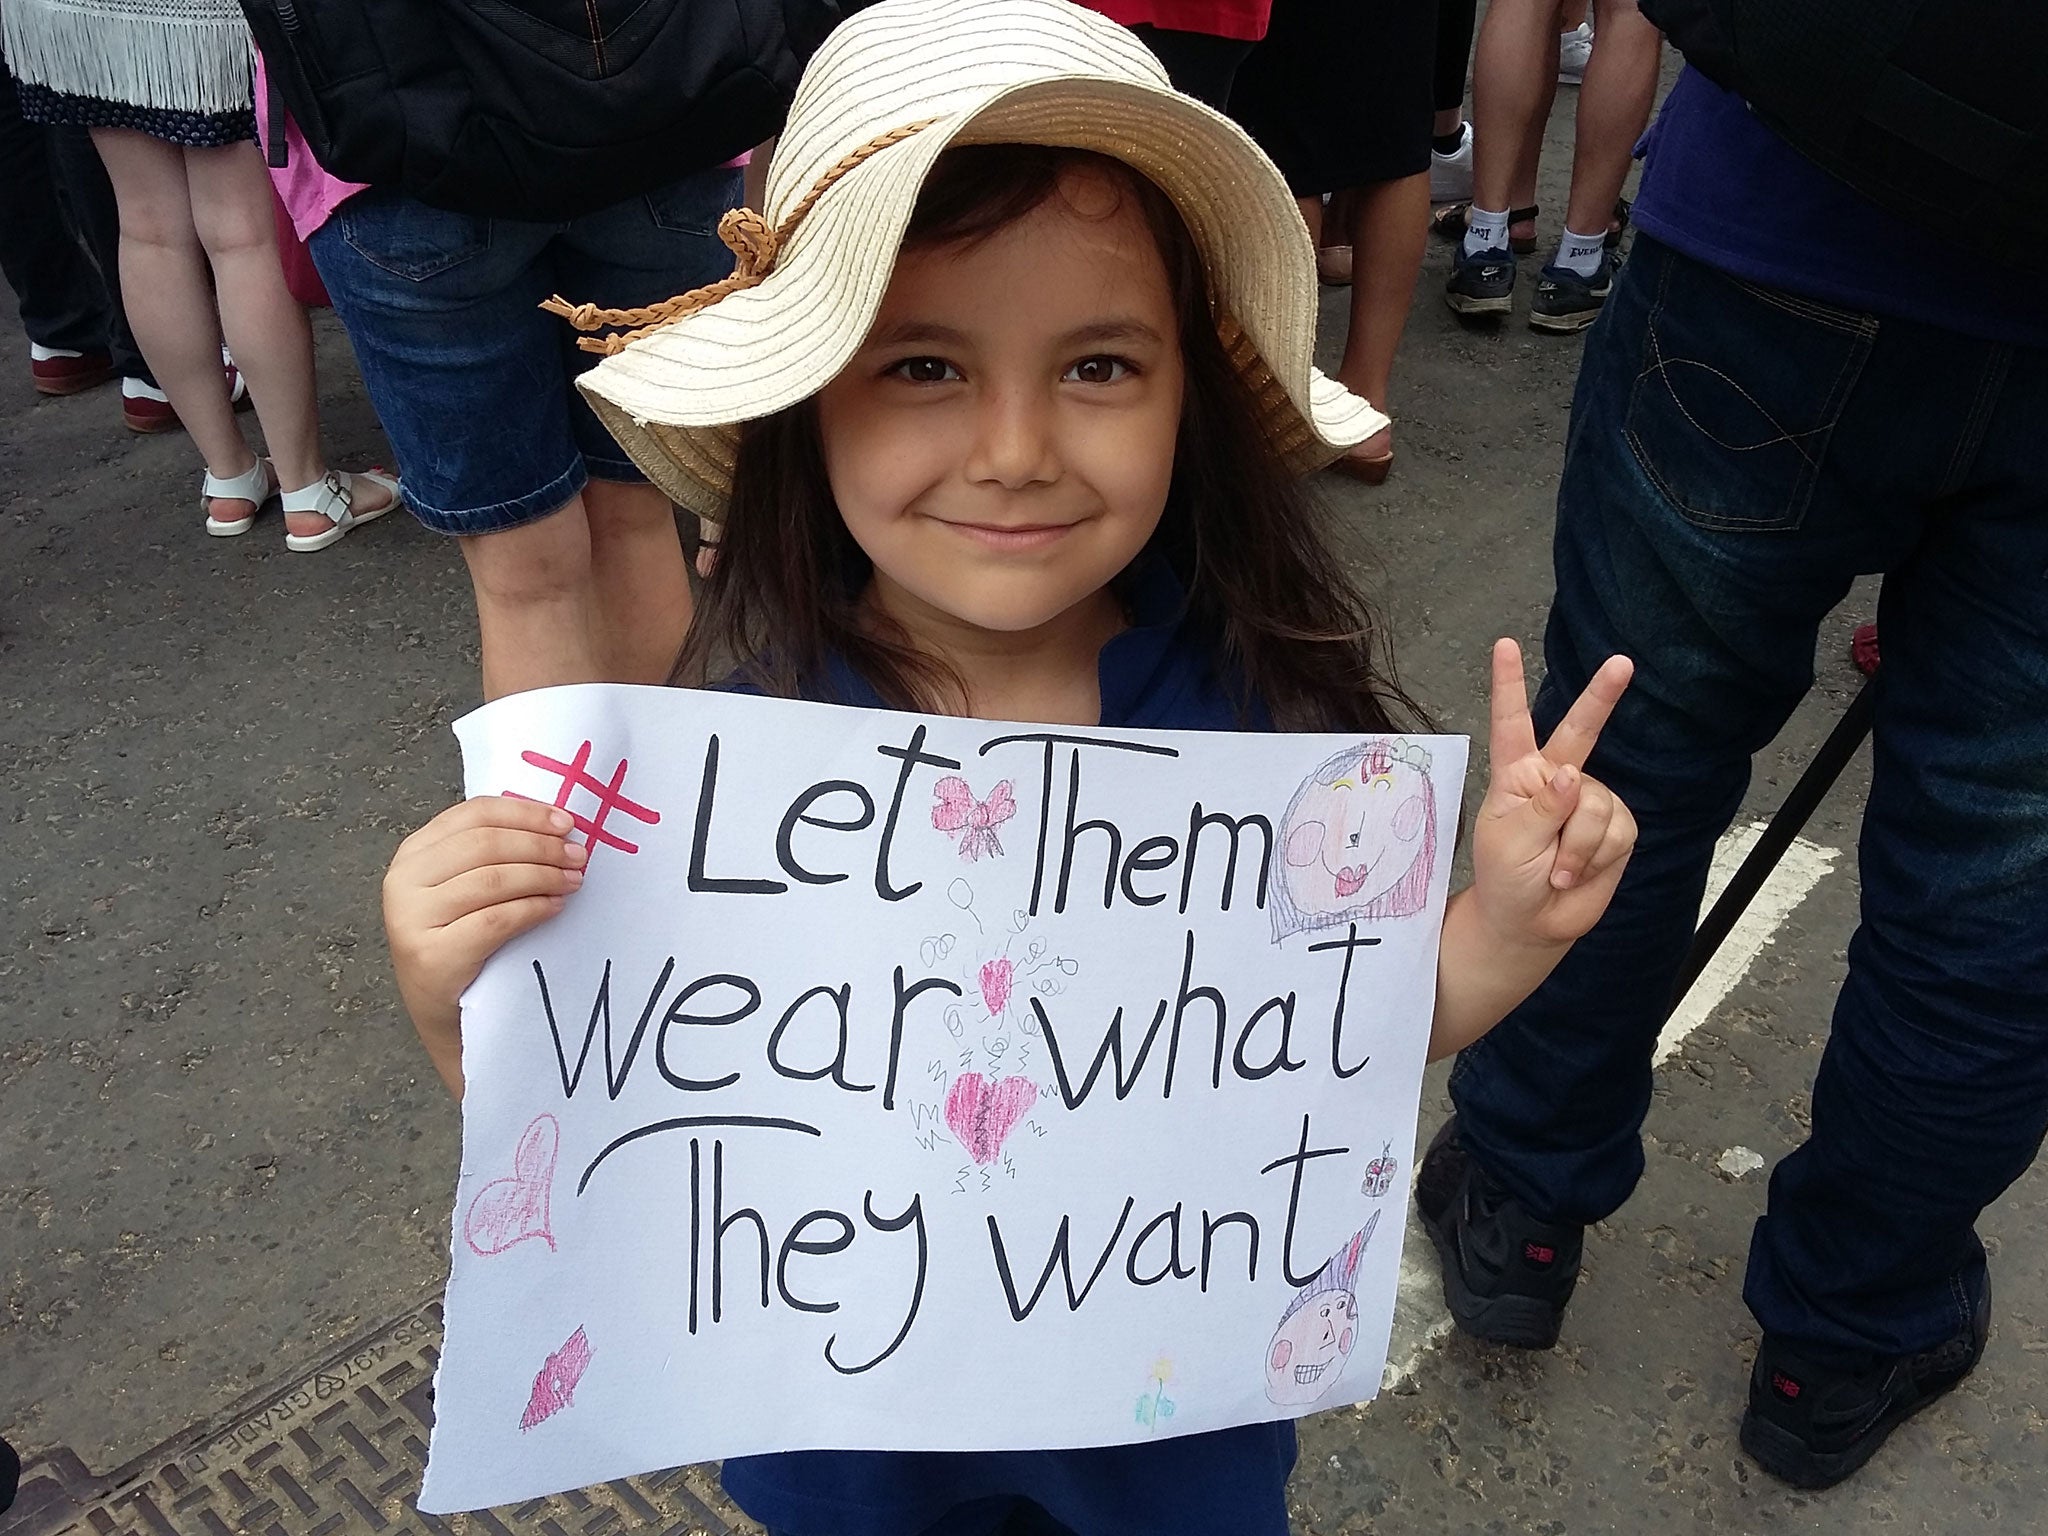 Somayia Khan’s six-year-old daughter came prepared with her own message for lawmakers in France